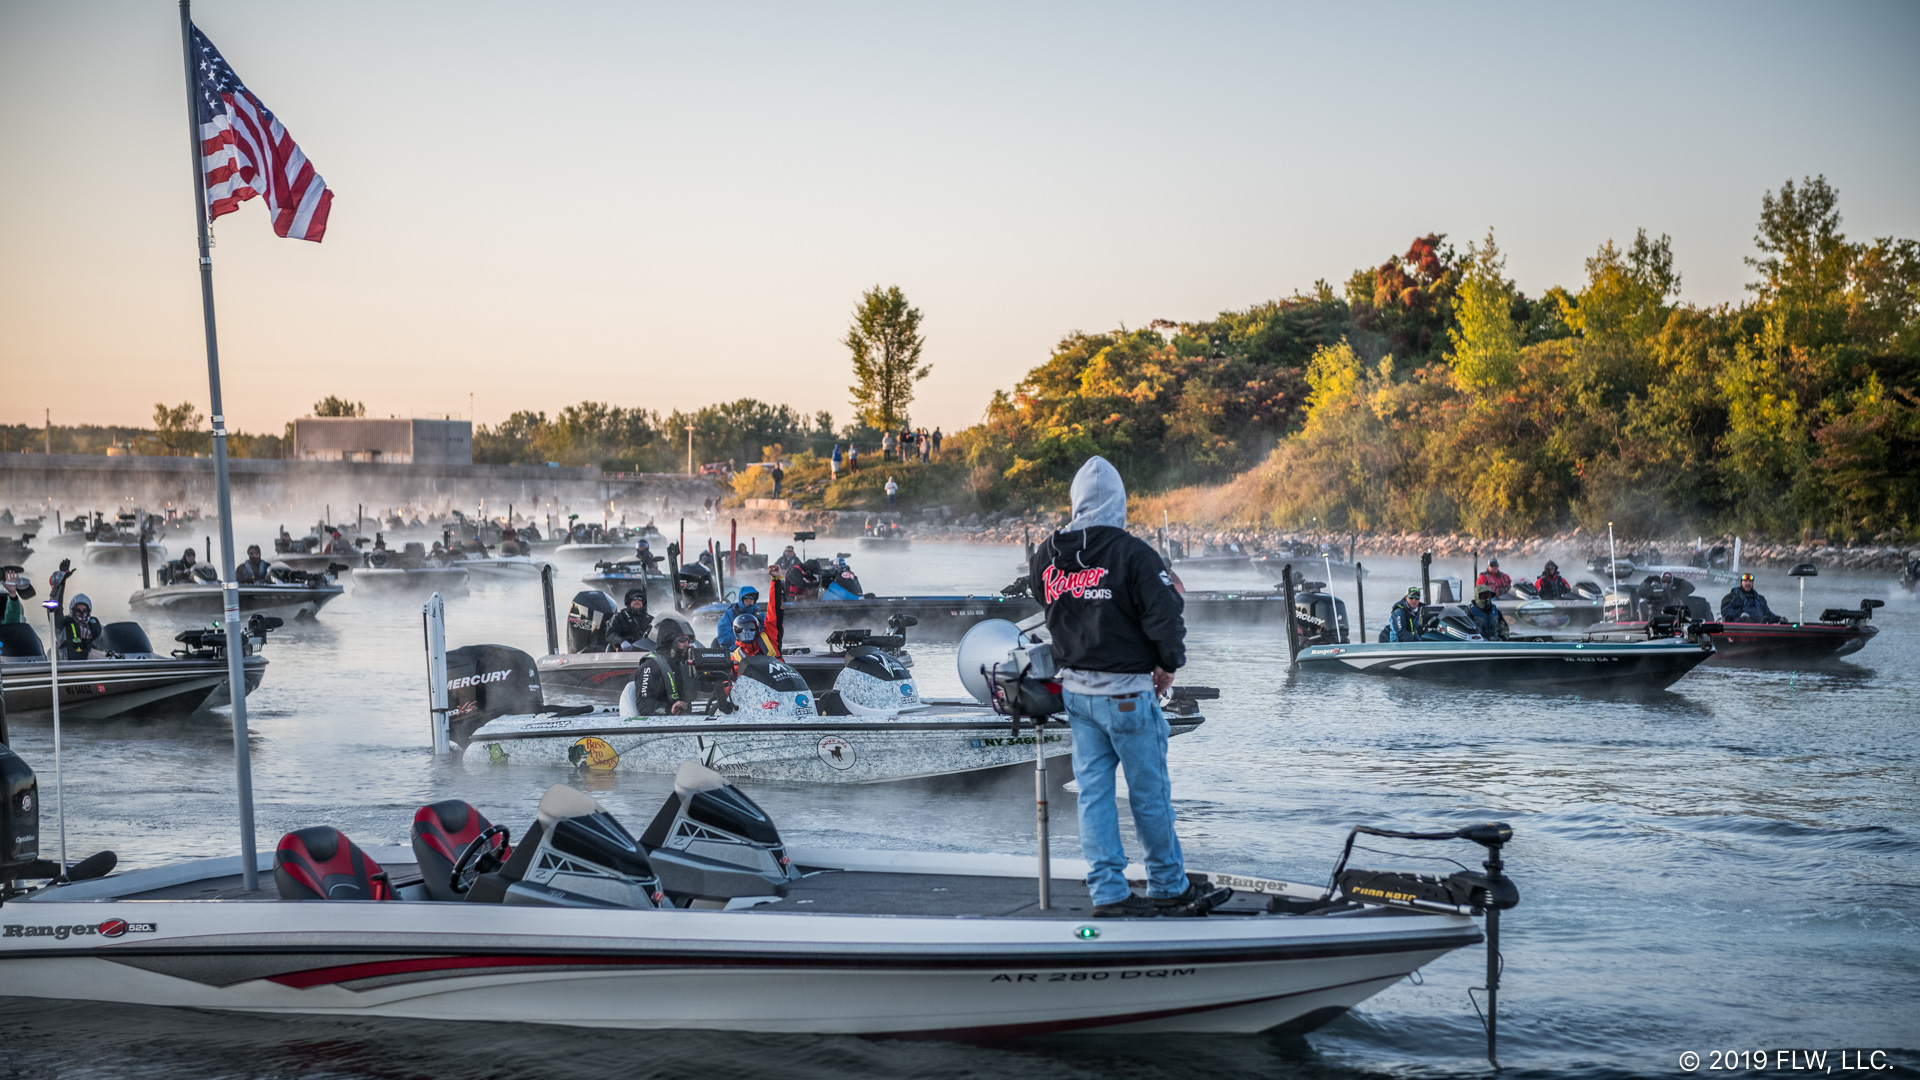 MLF ACQUIRES FLW: “How will it affect me?” from High School to Pro Anglers  - Major League Fishing